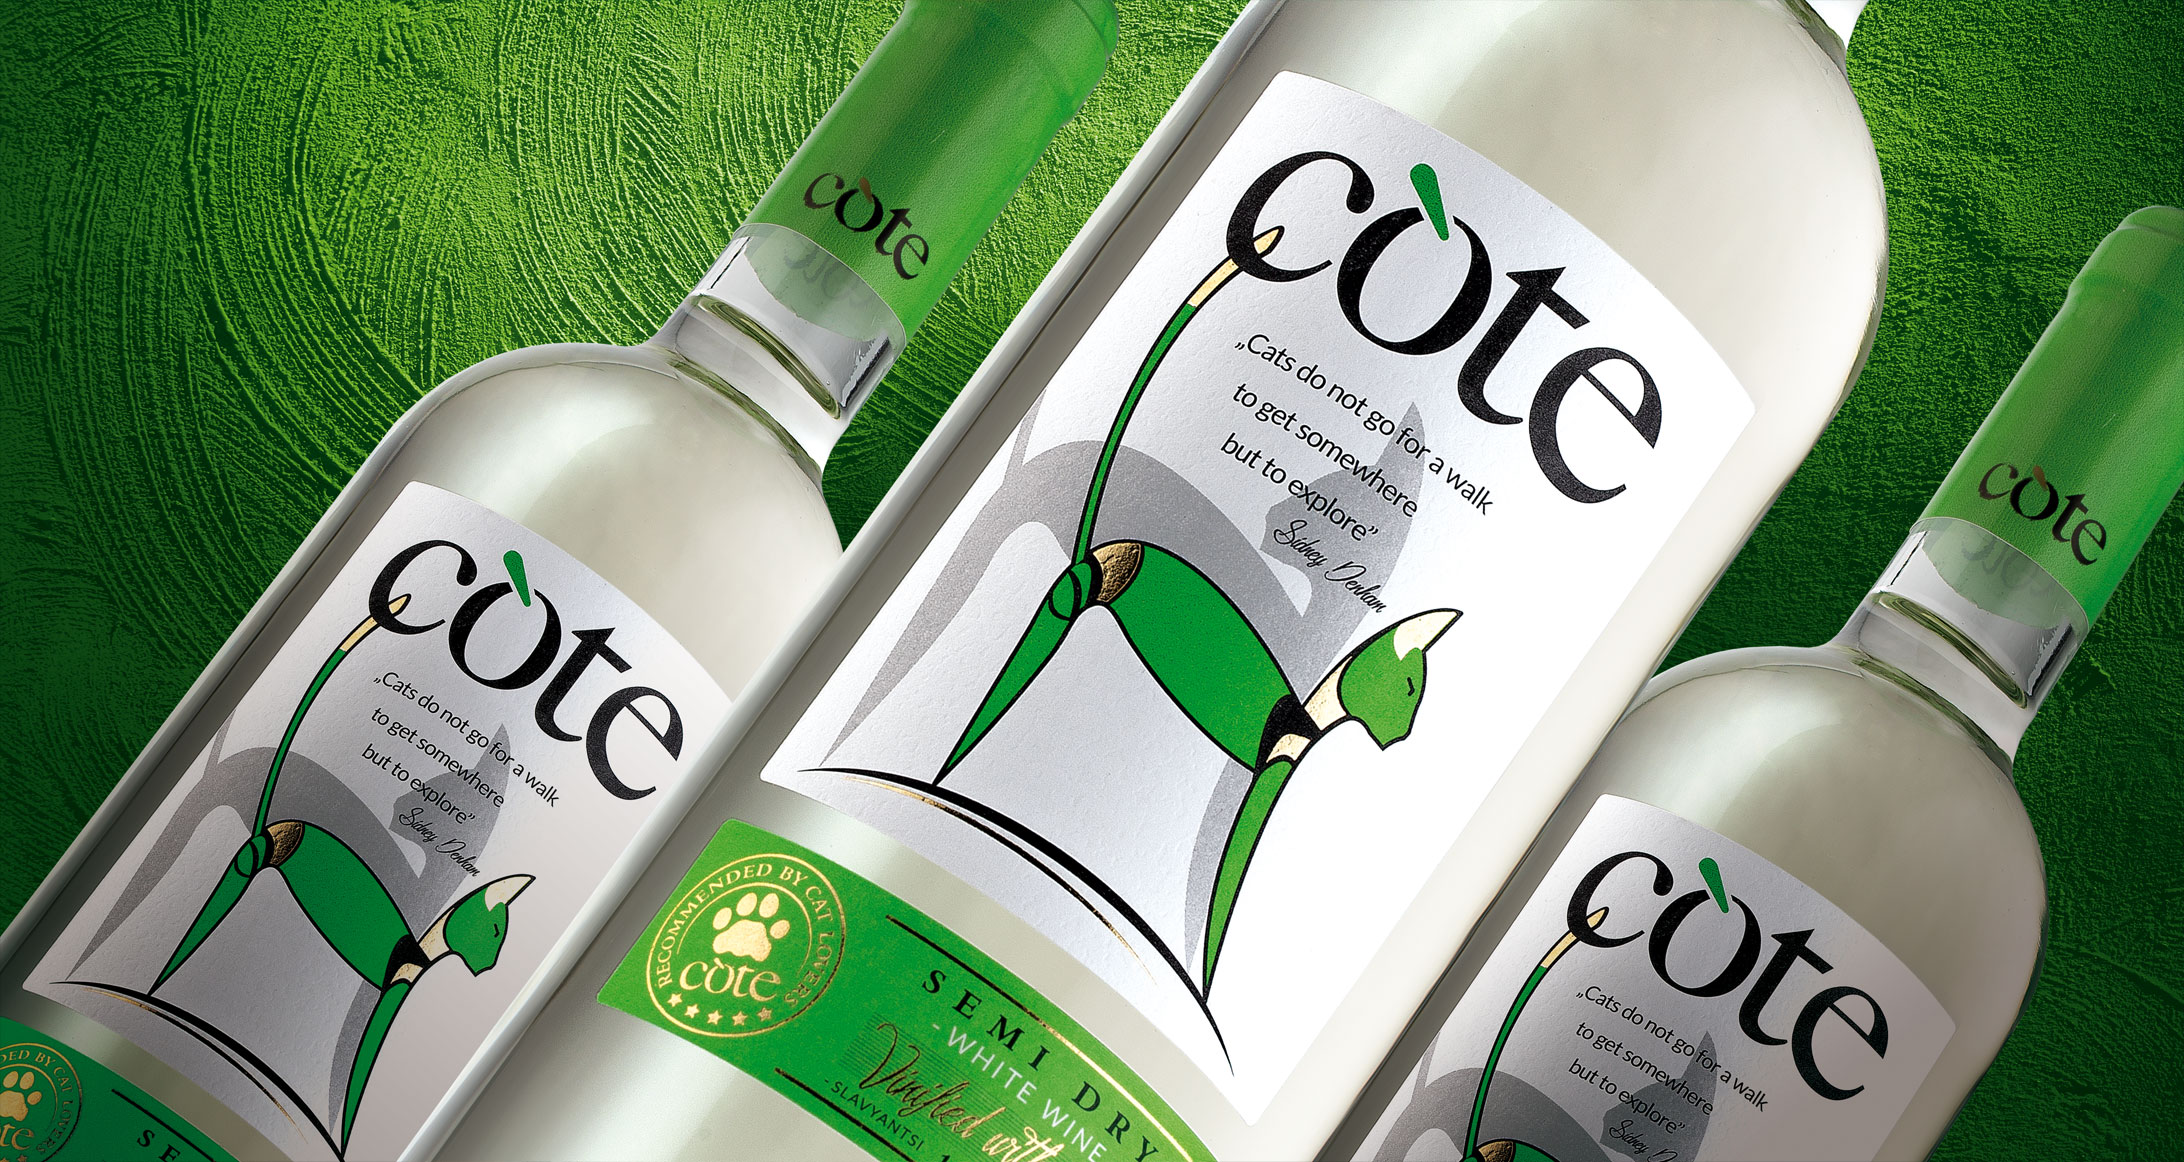 cote wine packaging facelift